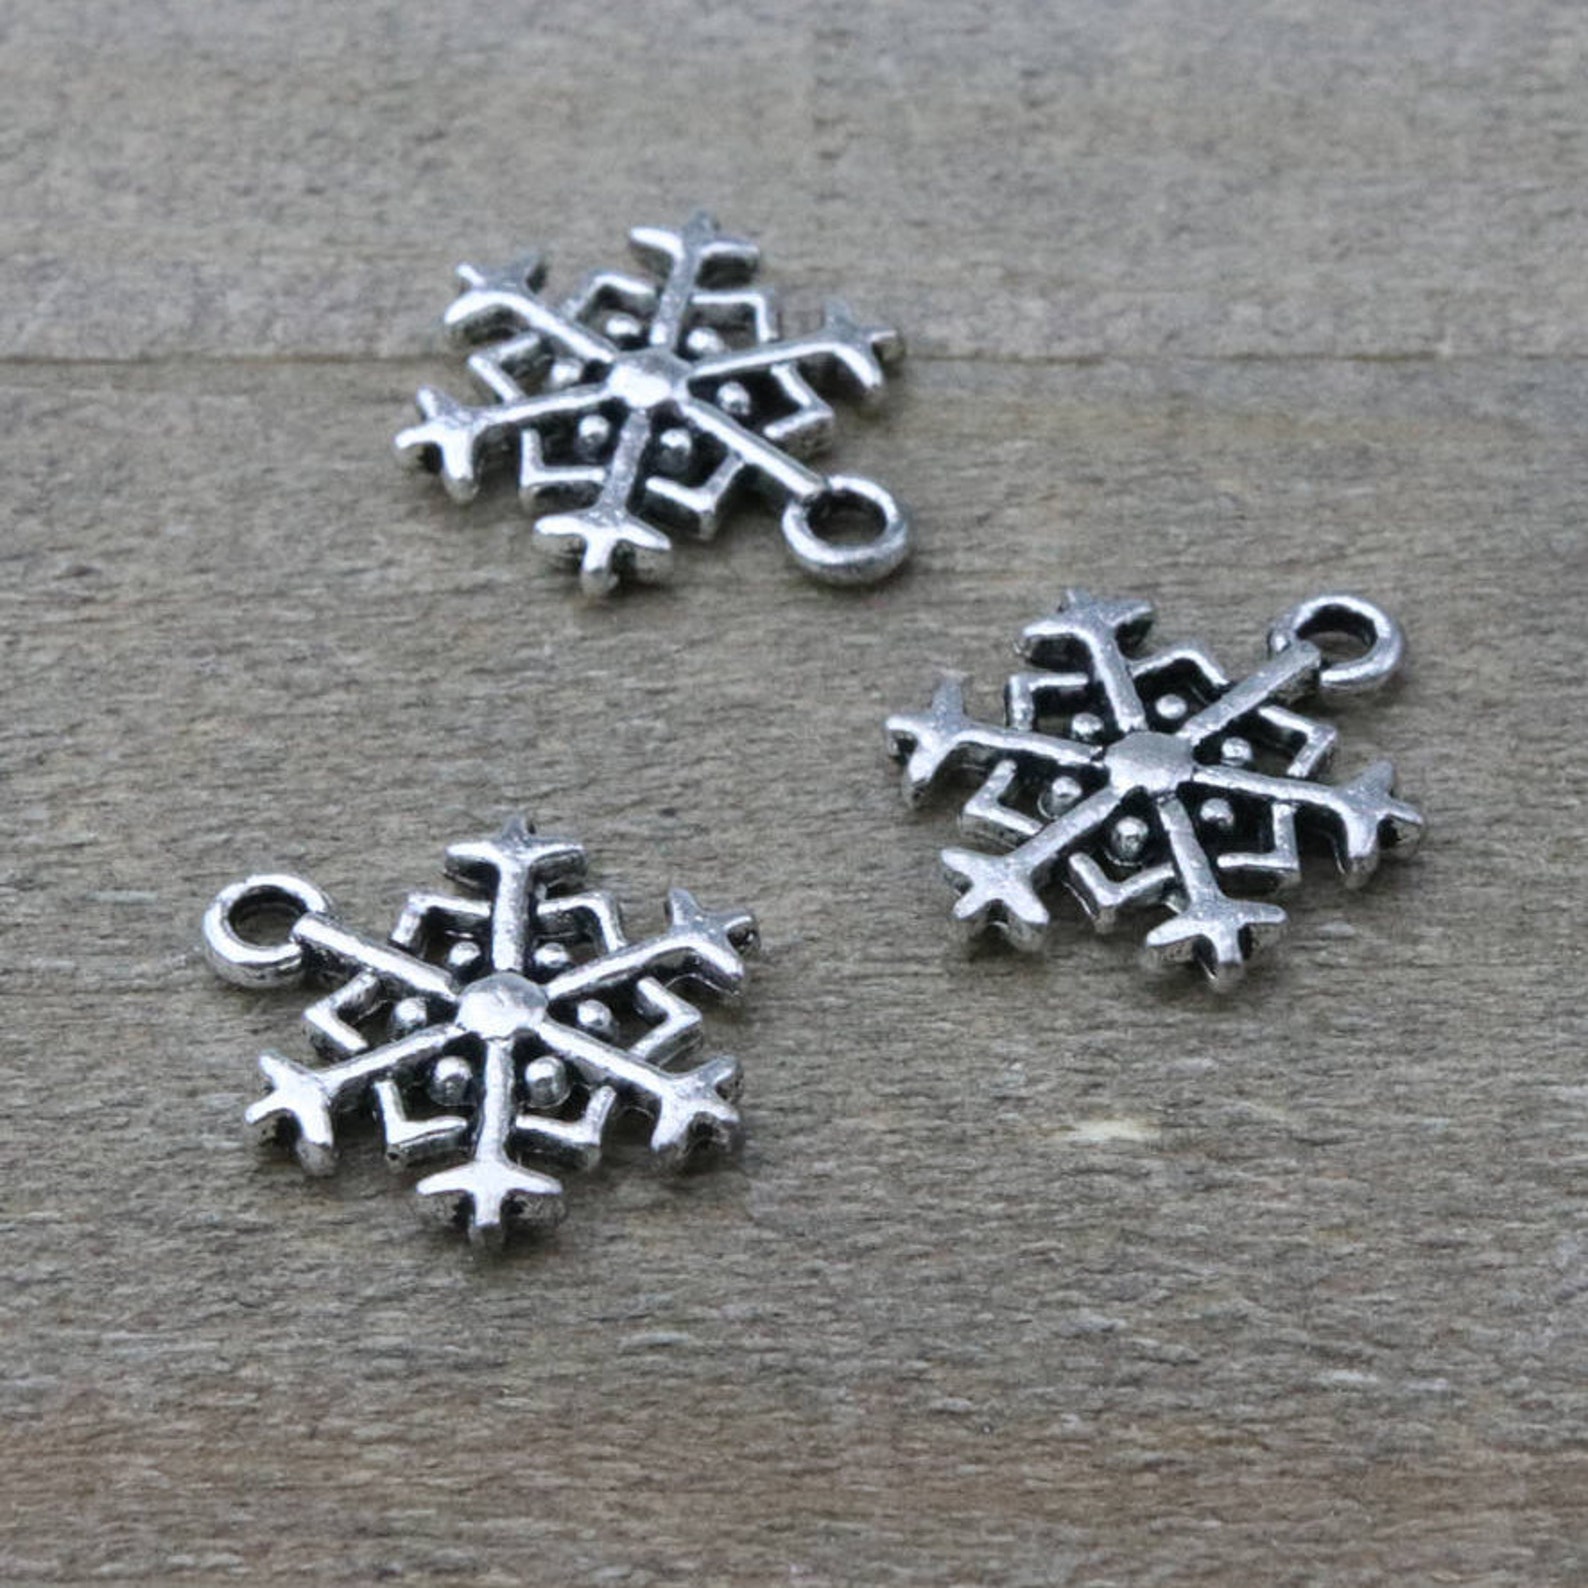 10 PIECES Snowflake charm snow charm winter charm holiday | Etsy